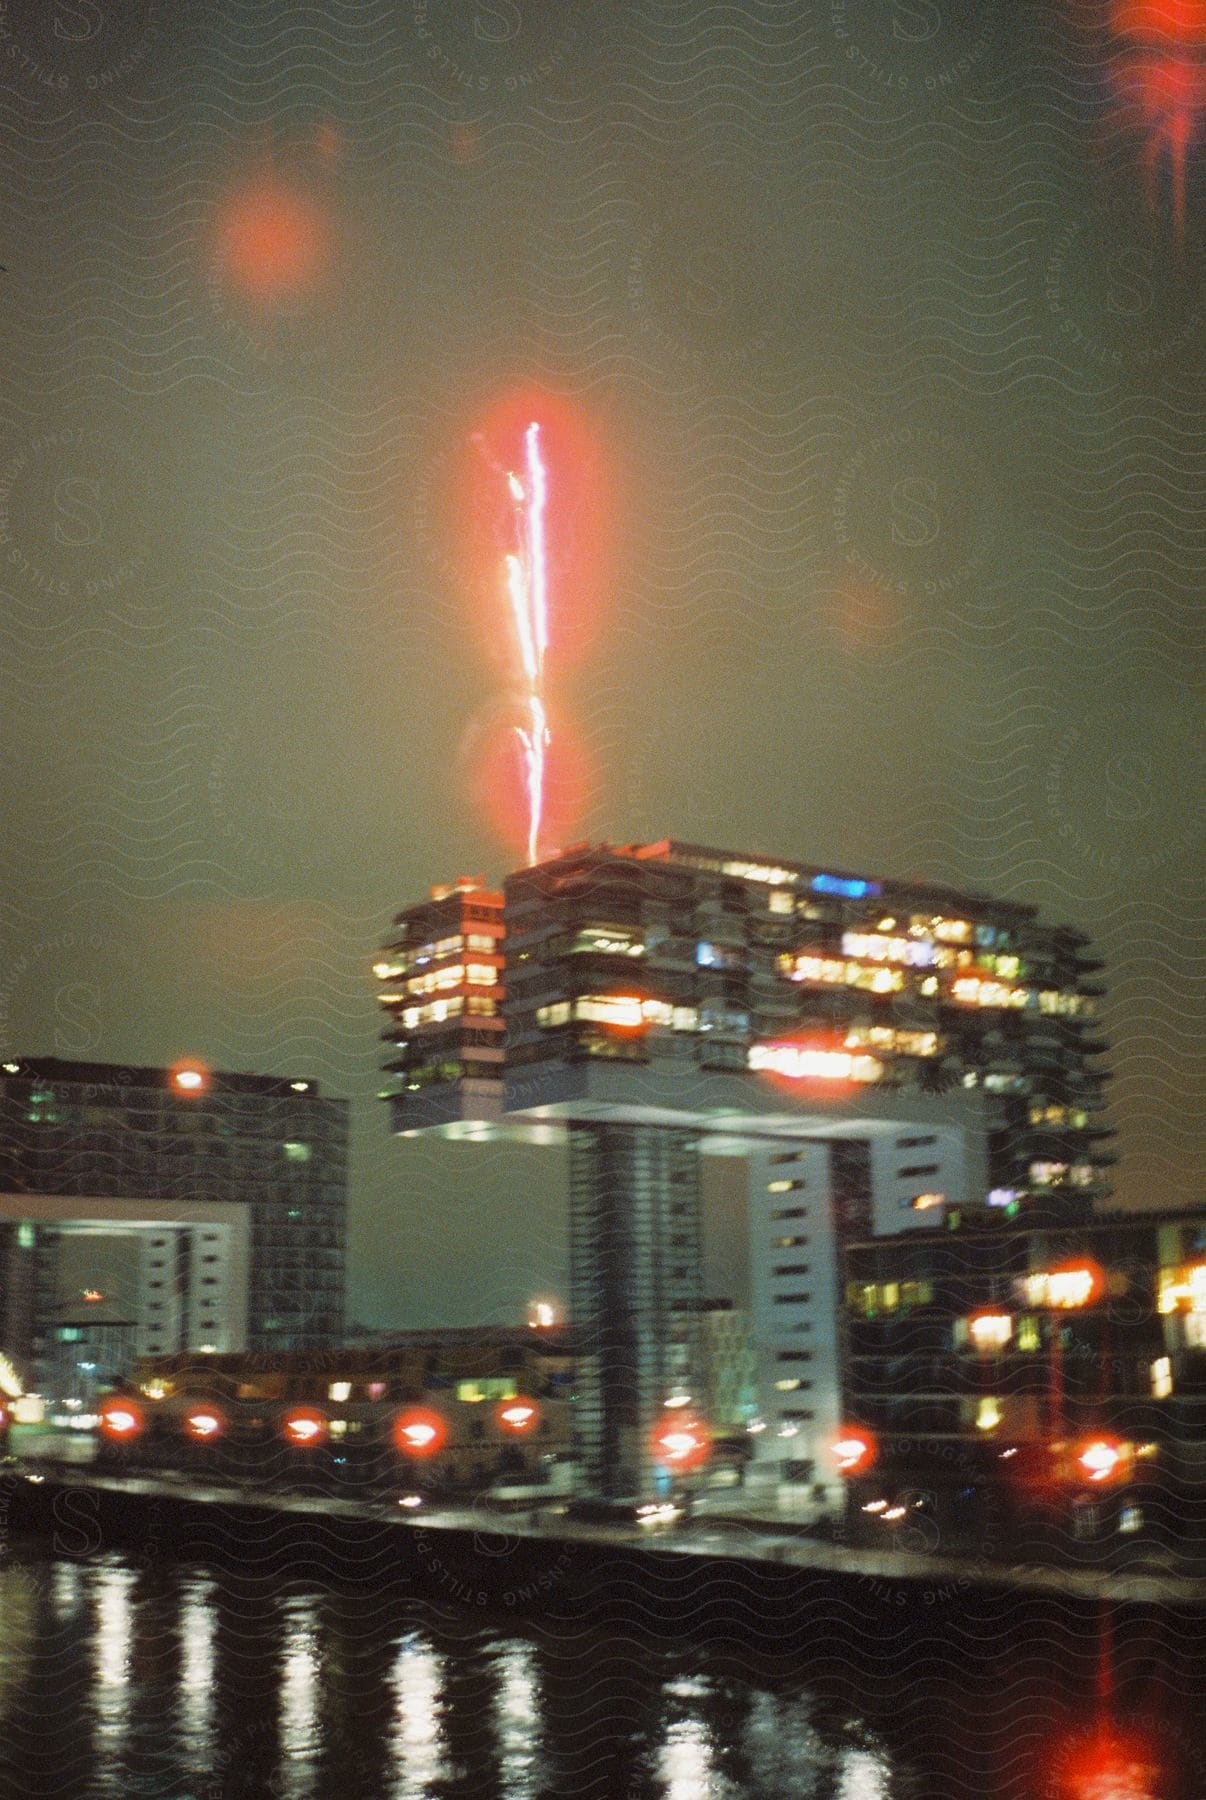 Modern buildings with lights on one building has a pink fireworklike line shooting out of the top